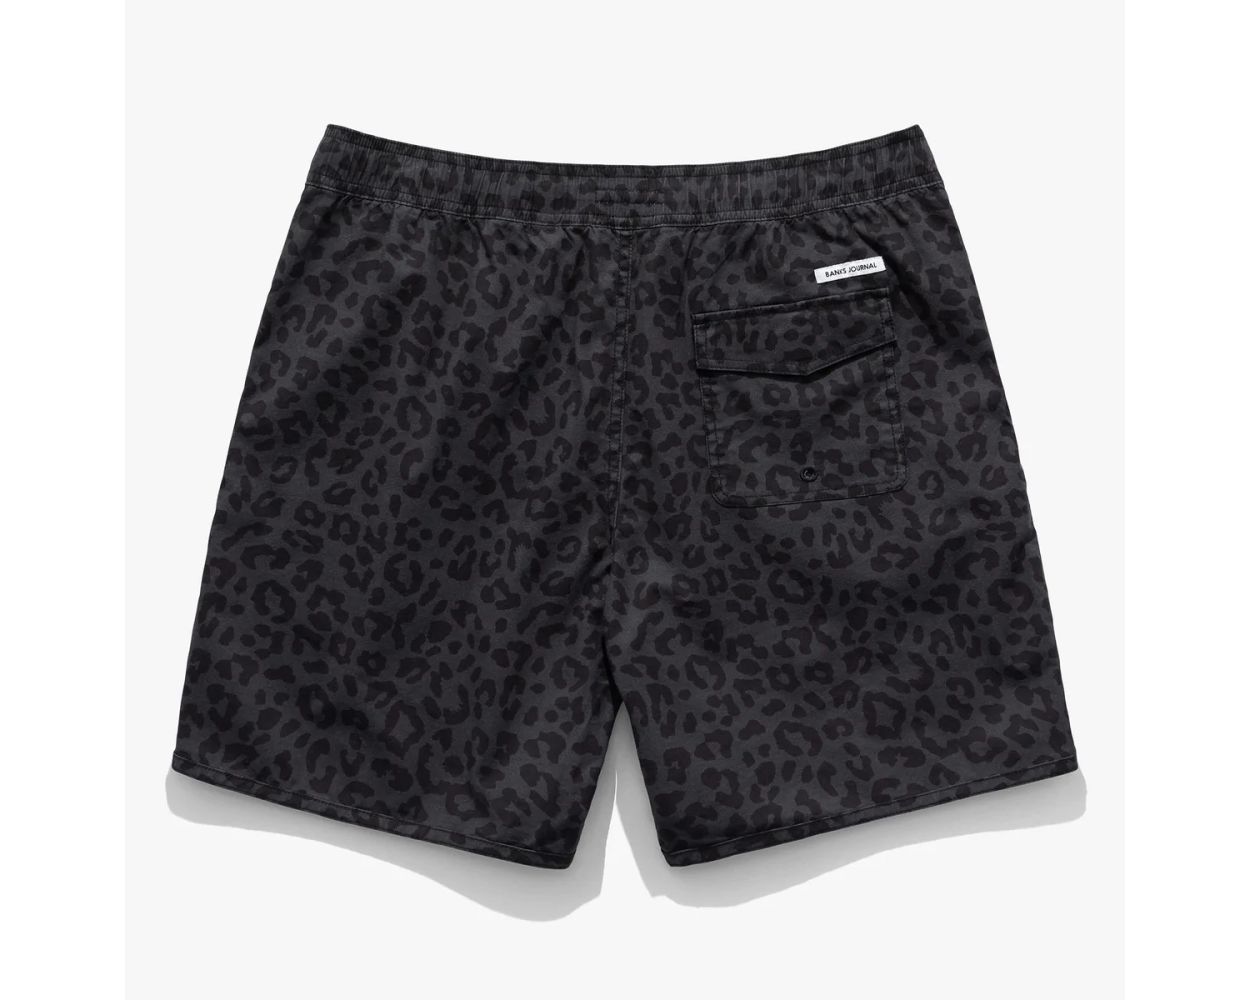  Banks Journal Wilder Elastic Boardshort for Men, Cotton Leopard  Print Men's Shorts for Swimming, Surfing, Beach Casual Swim Trunks with  Pockets, Elastic Waistband, 17” Outseam, Supply Fit : Clothing, Shoes 